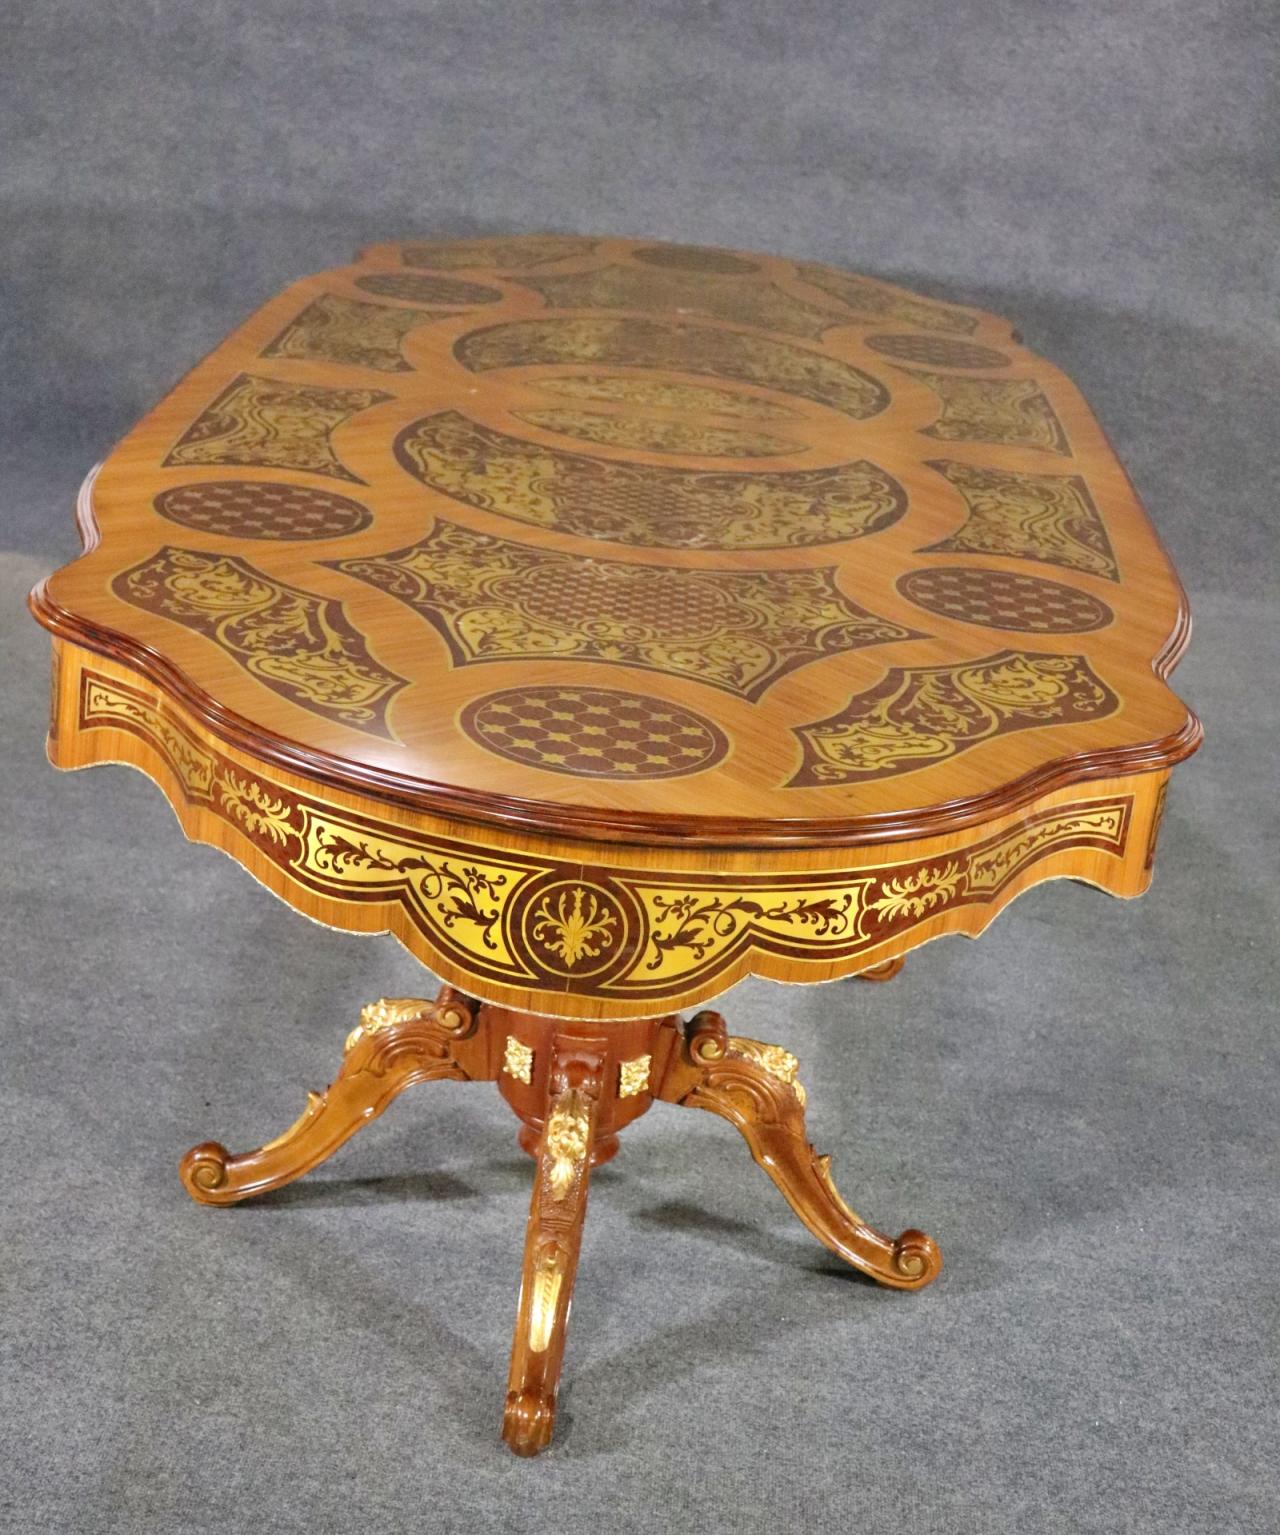 Rococo Revival Monumental Kingwood Bronze and Walnut Italian Brass Boulle Inlaid Dining Table